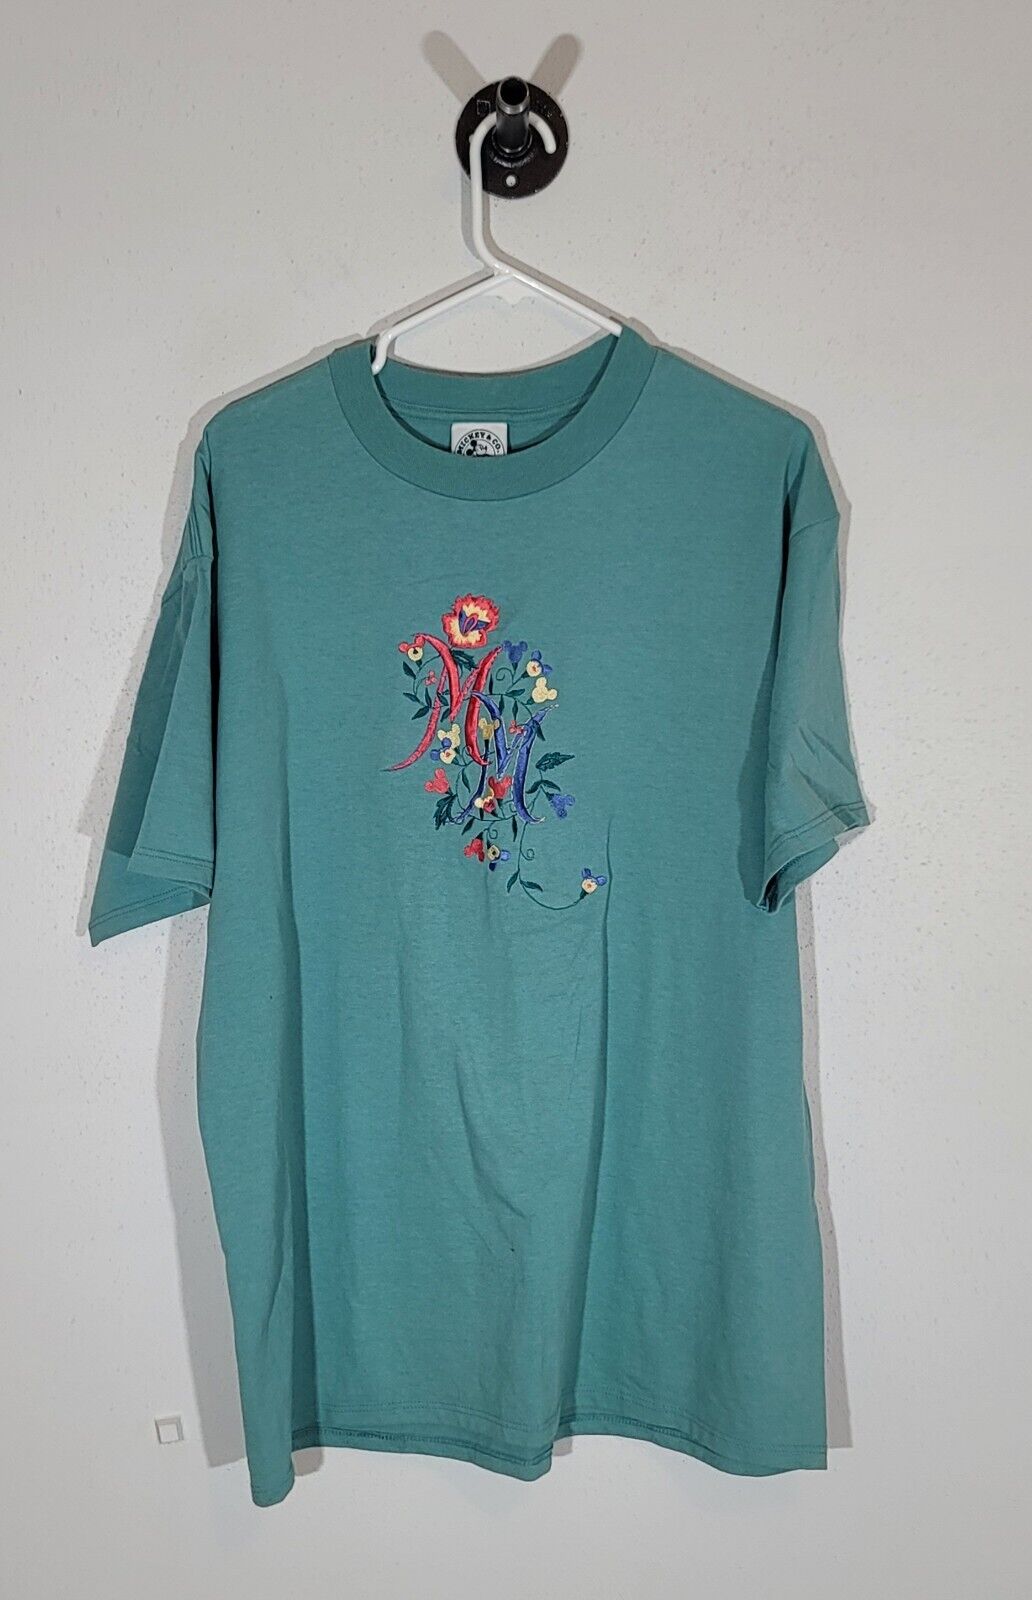 Vtg '90s Disney Mickey Mouse & Co Embroidered T-Shirt Women's XL 